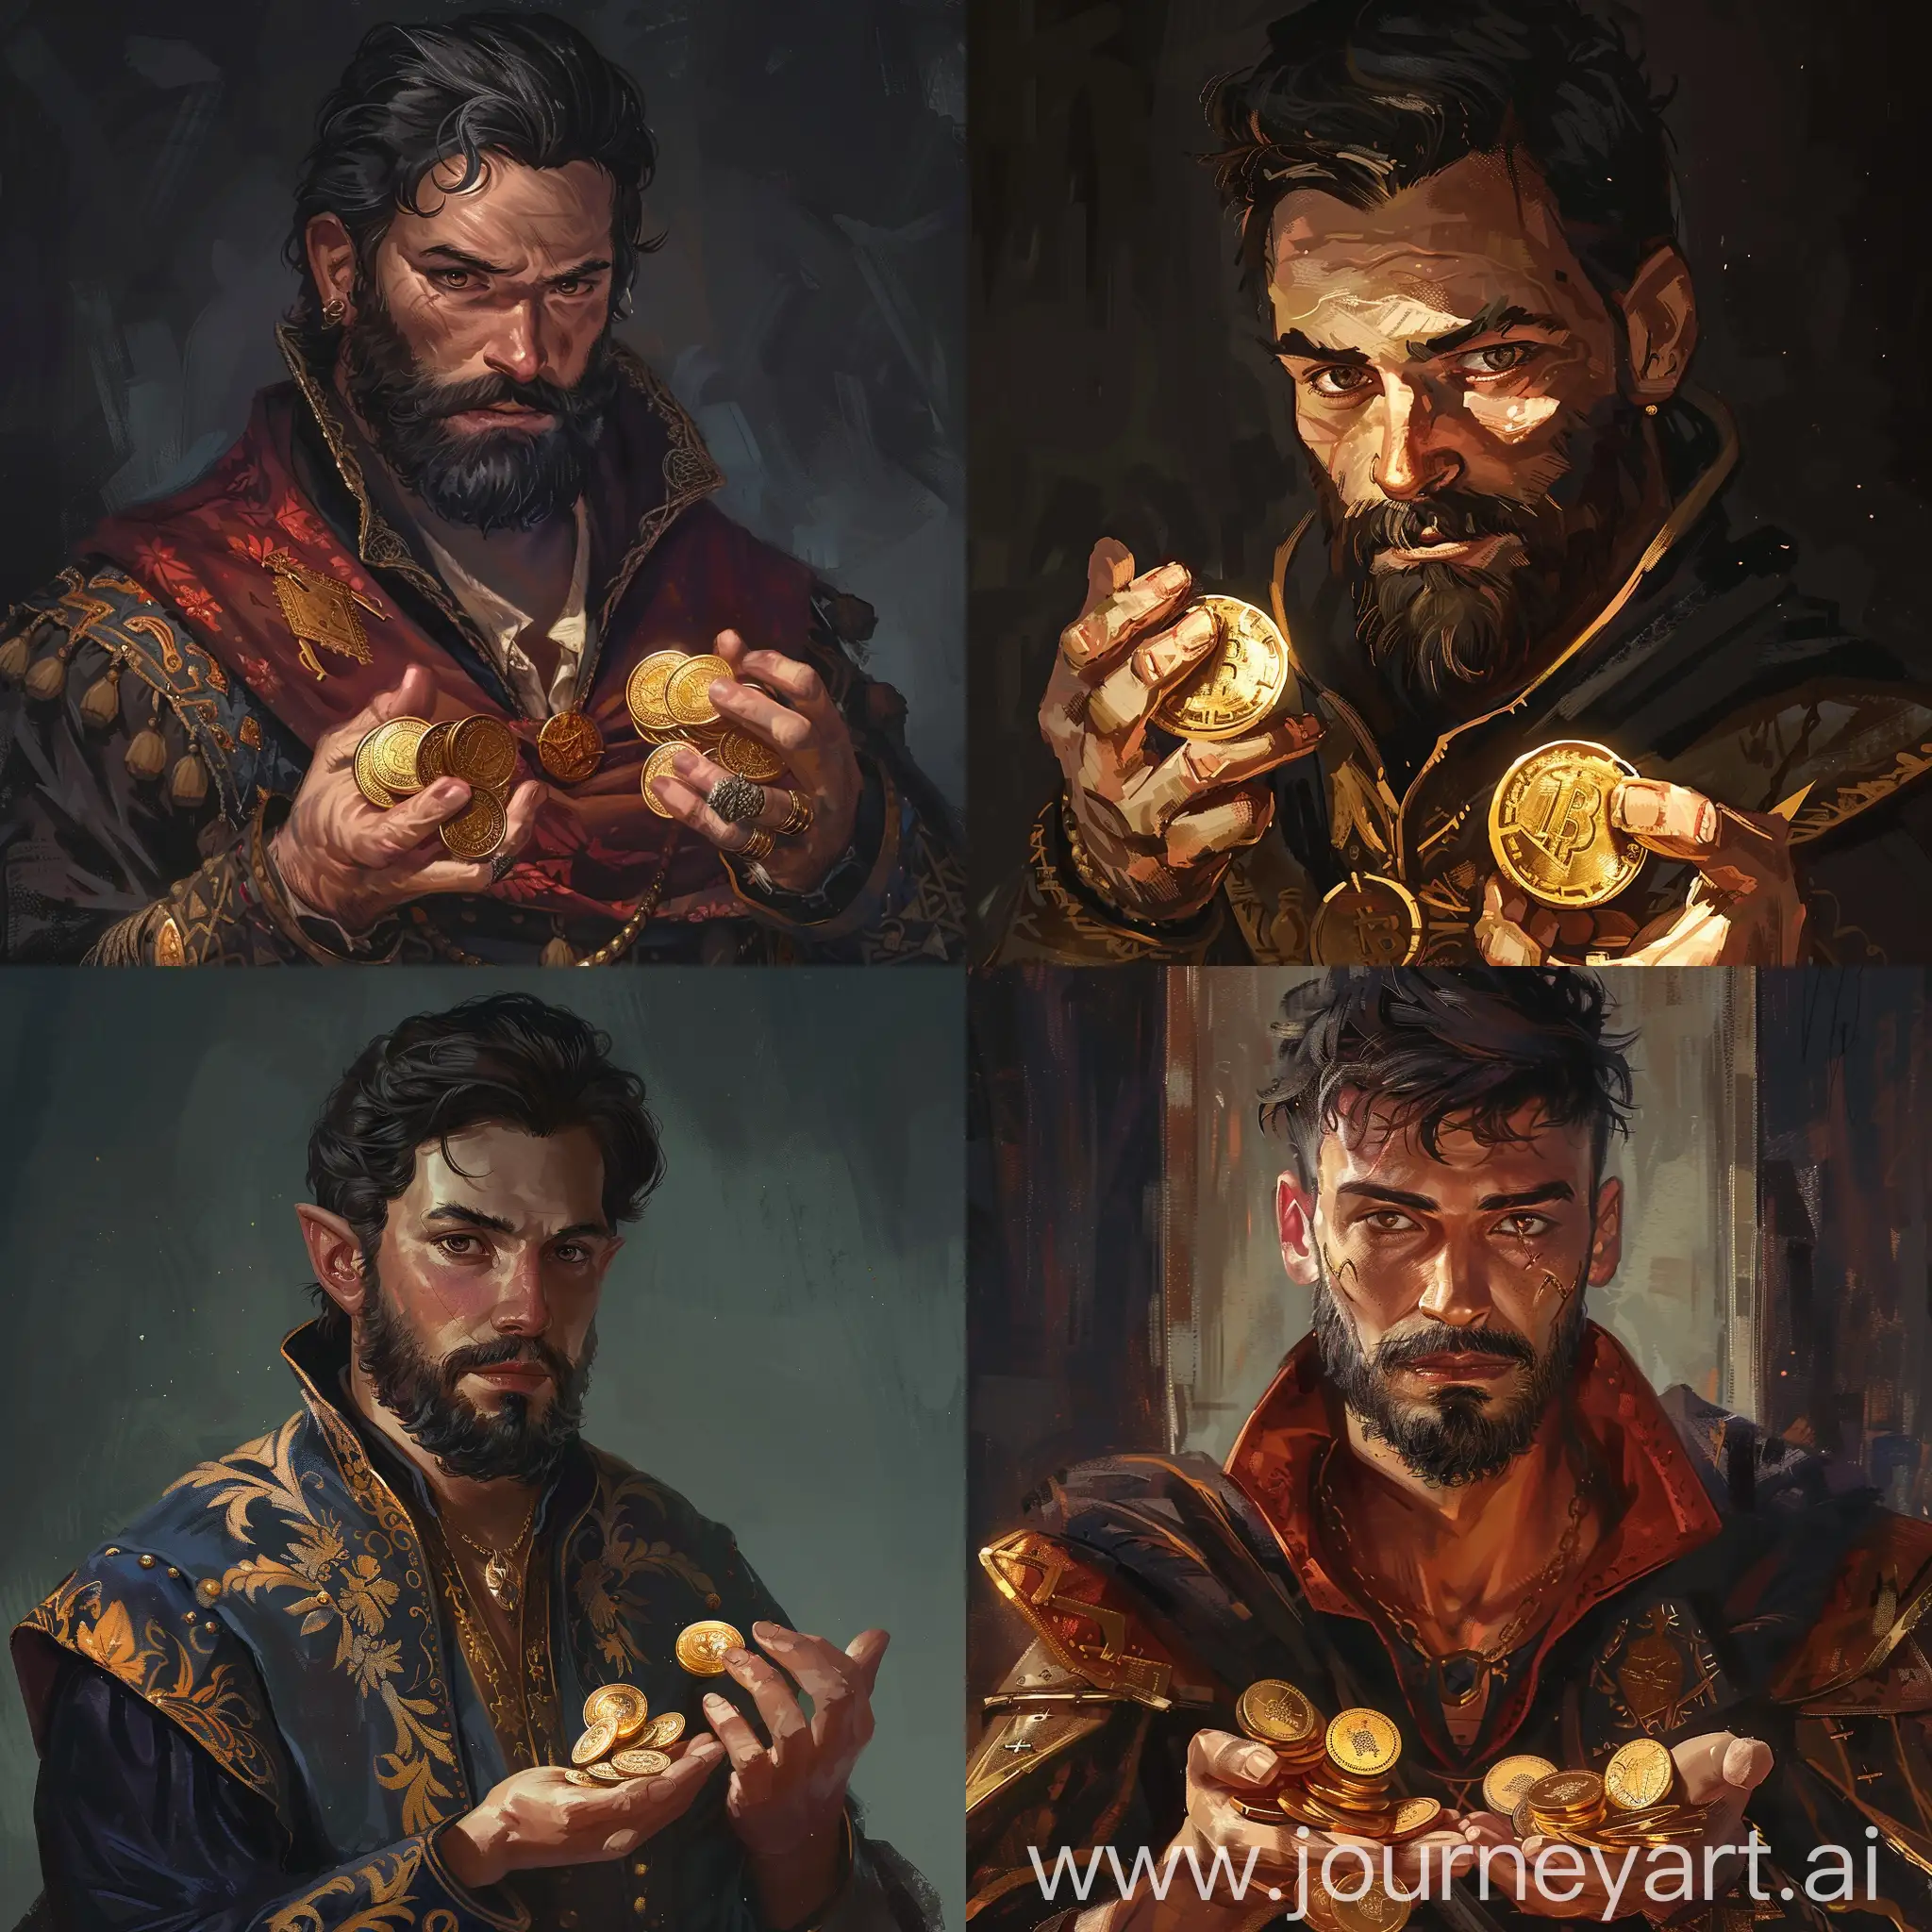 Medieval-Style-Portrait-of-Wealthy-BlackHaired-Man-Holding-Gold-Coins